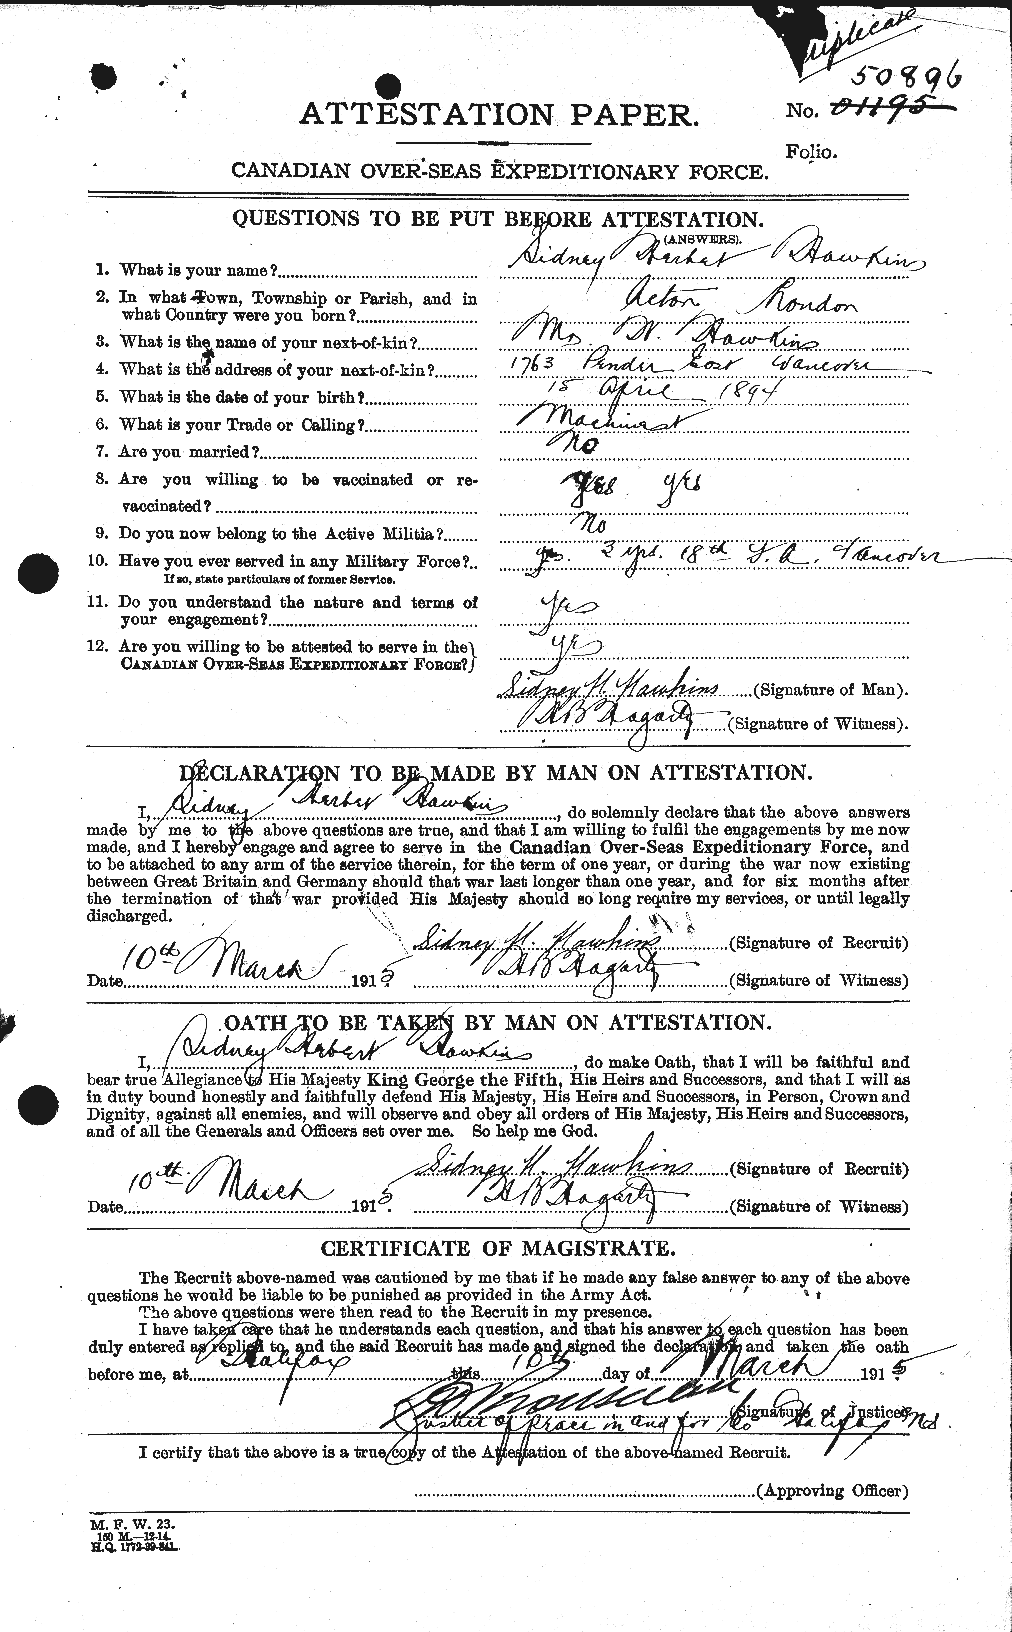 Personnel Records of the First World War - CEF 385608a